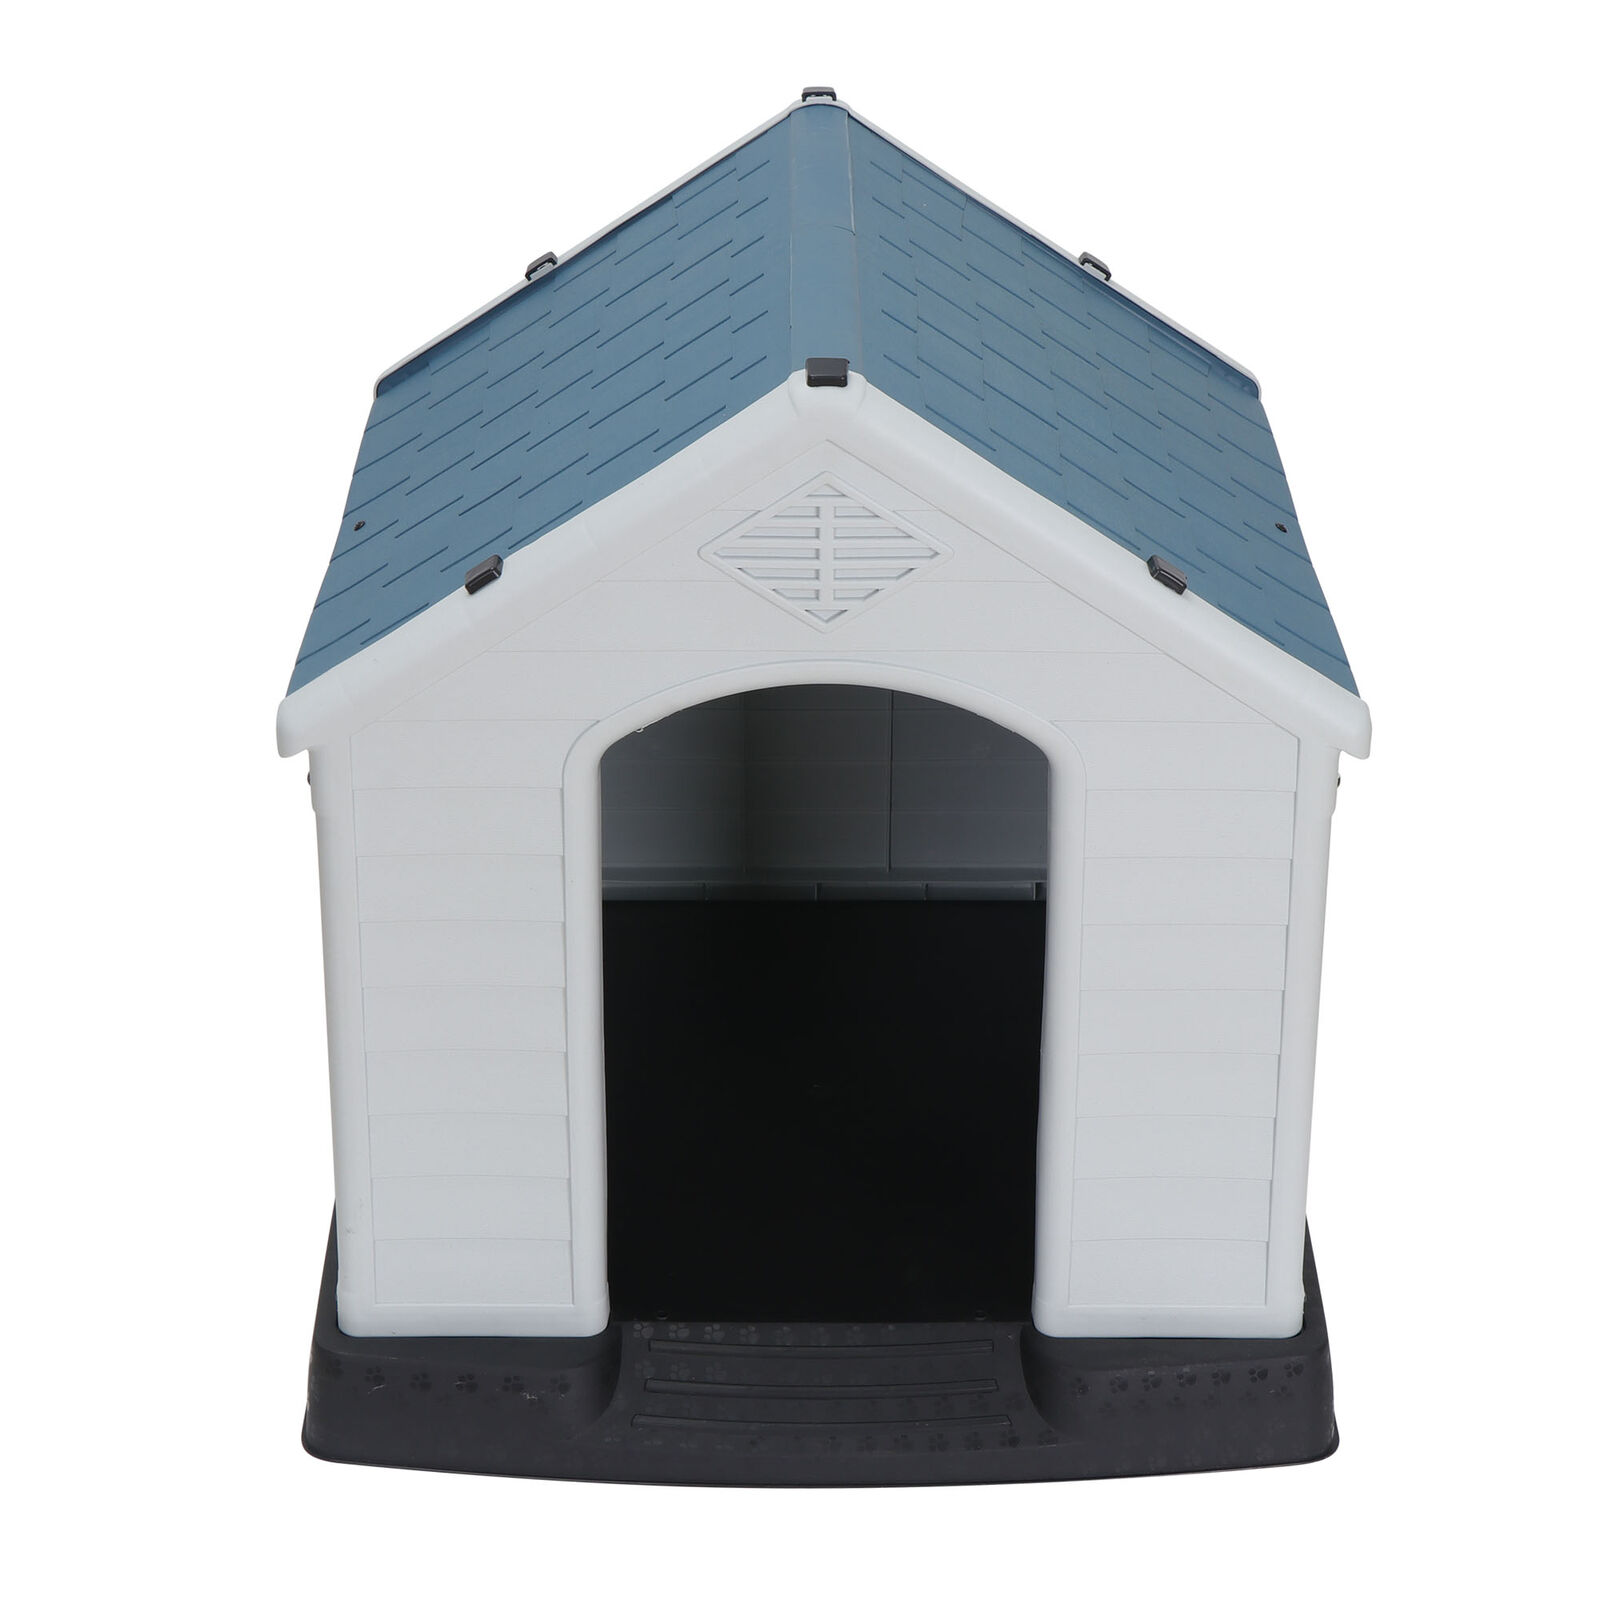 thinkstar Dog House Comfortable Cool Shelter Plastic Design Kennel For Puppy Sleep Well